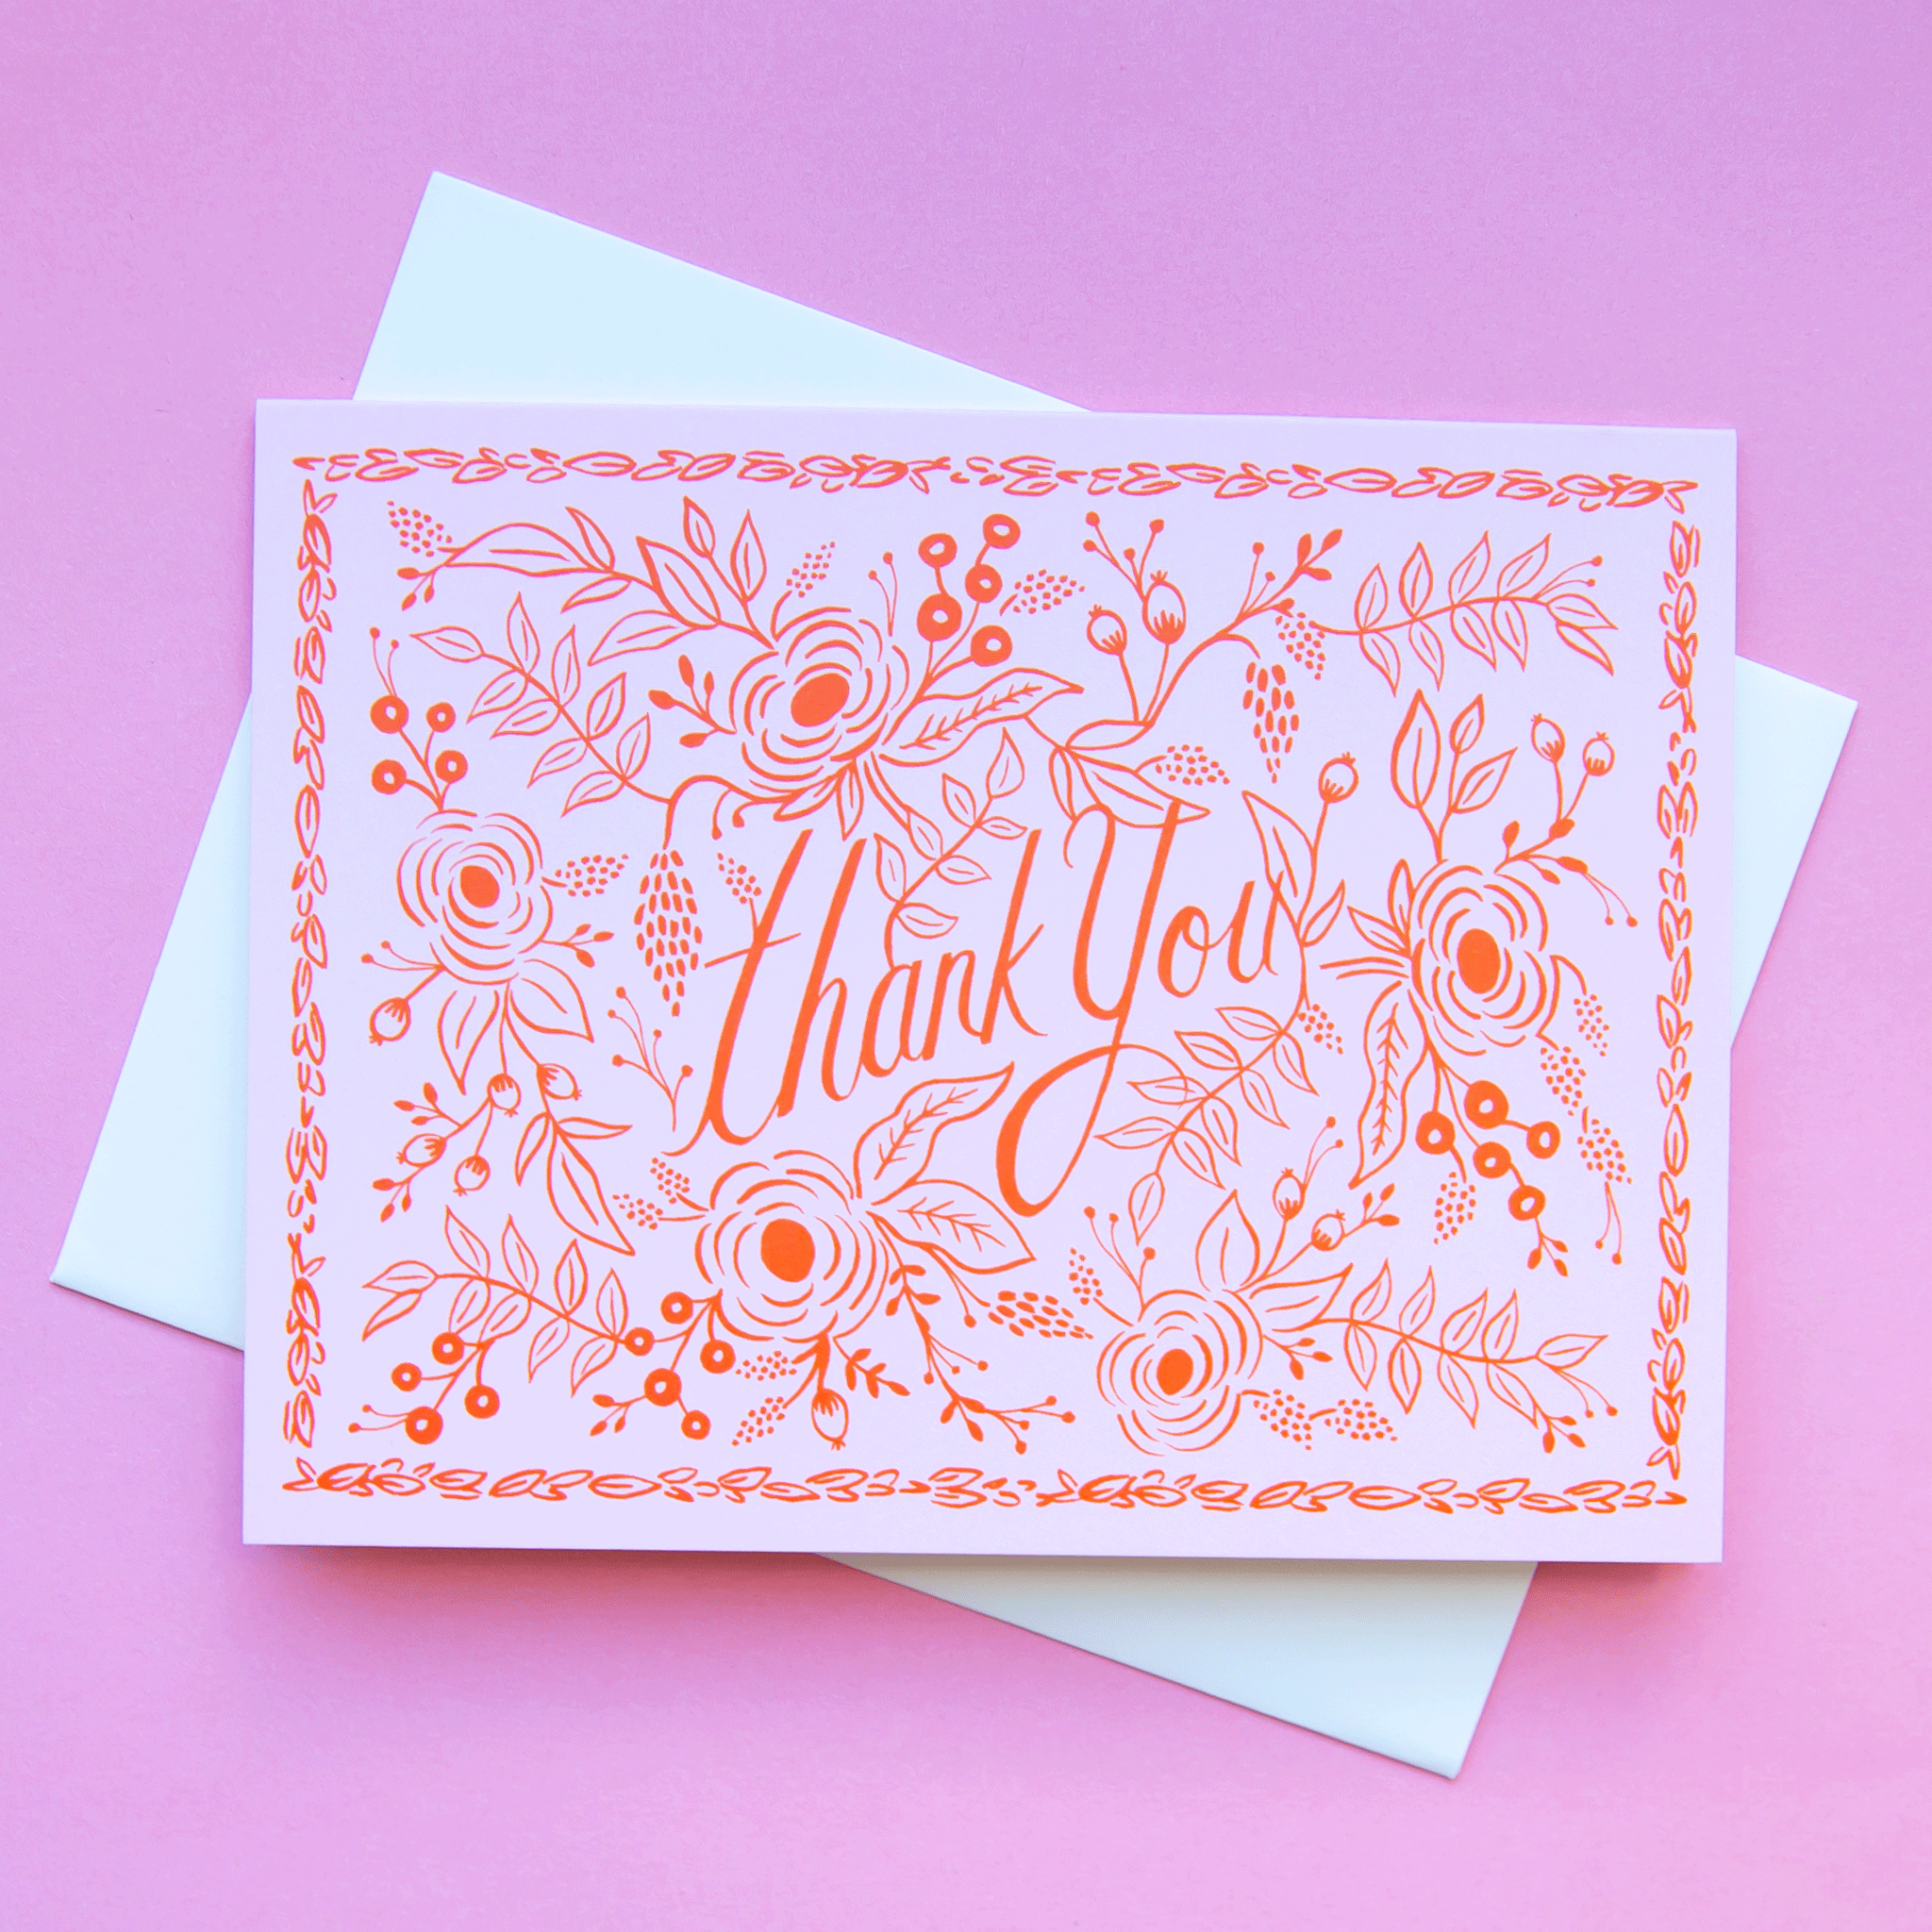 On a purple background is a pink and red thank you card with roses and floral illustrations around text that reads, "Thank You".